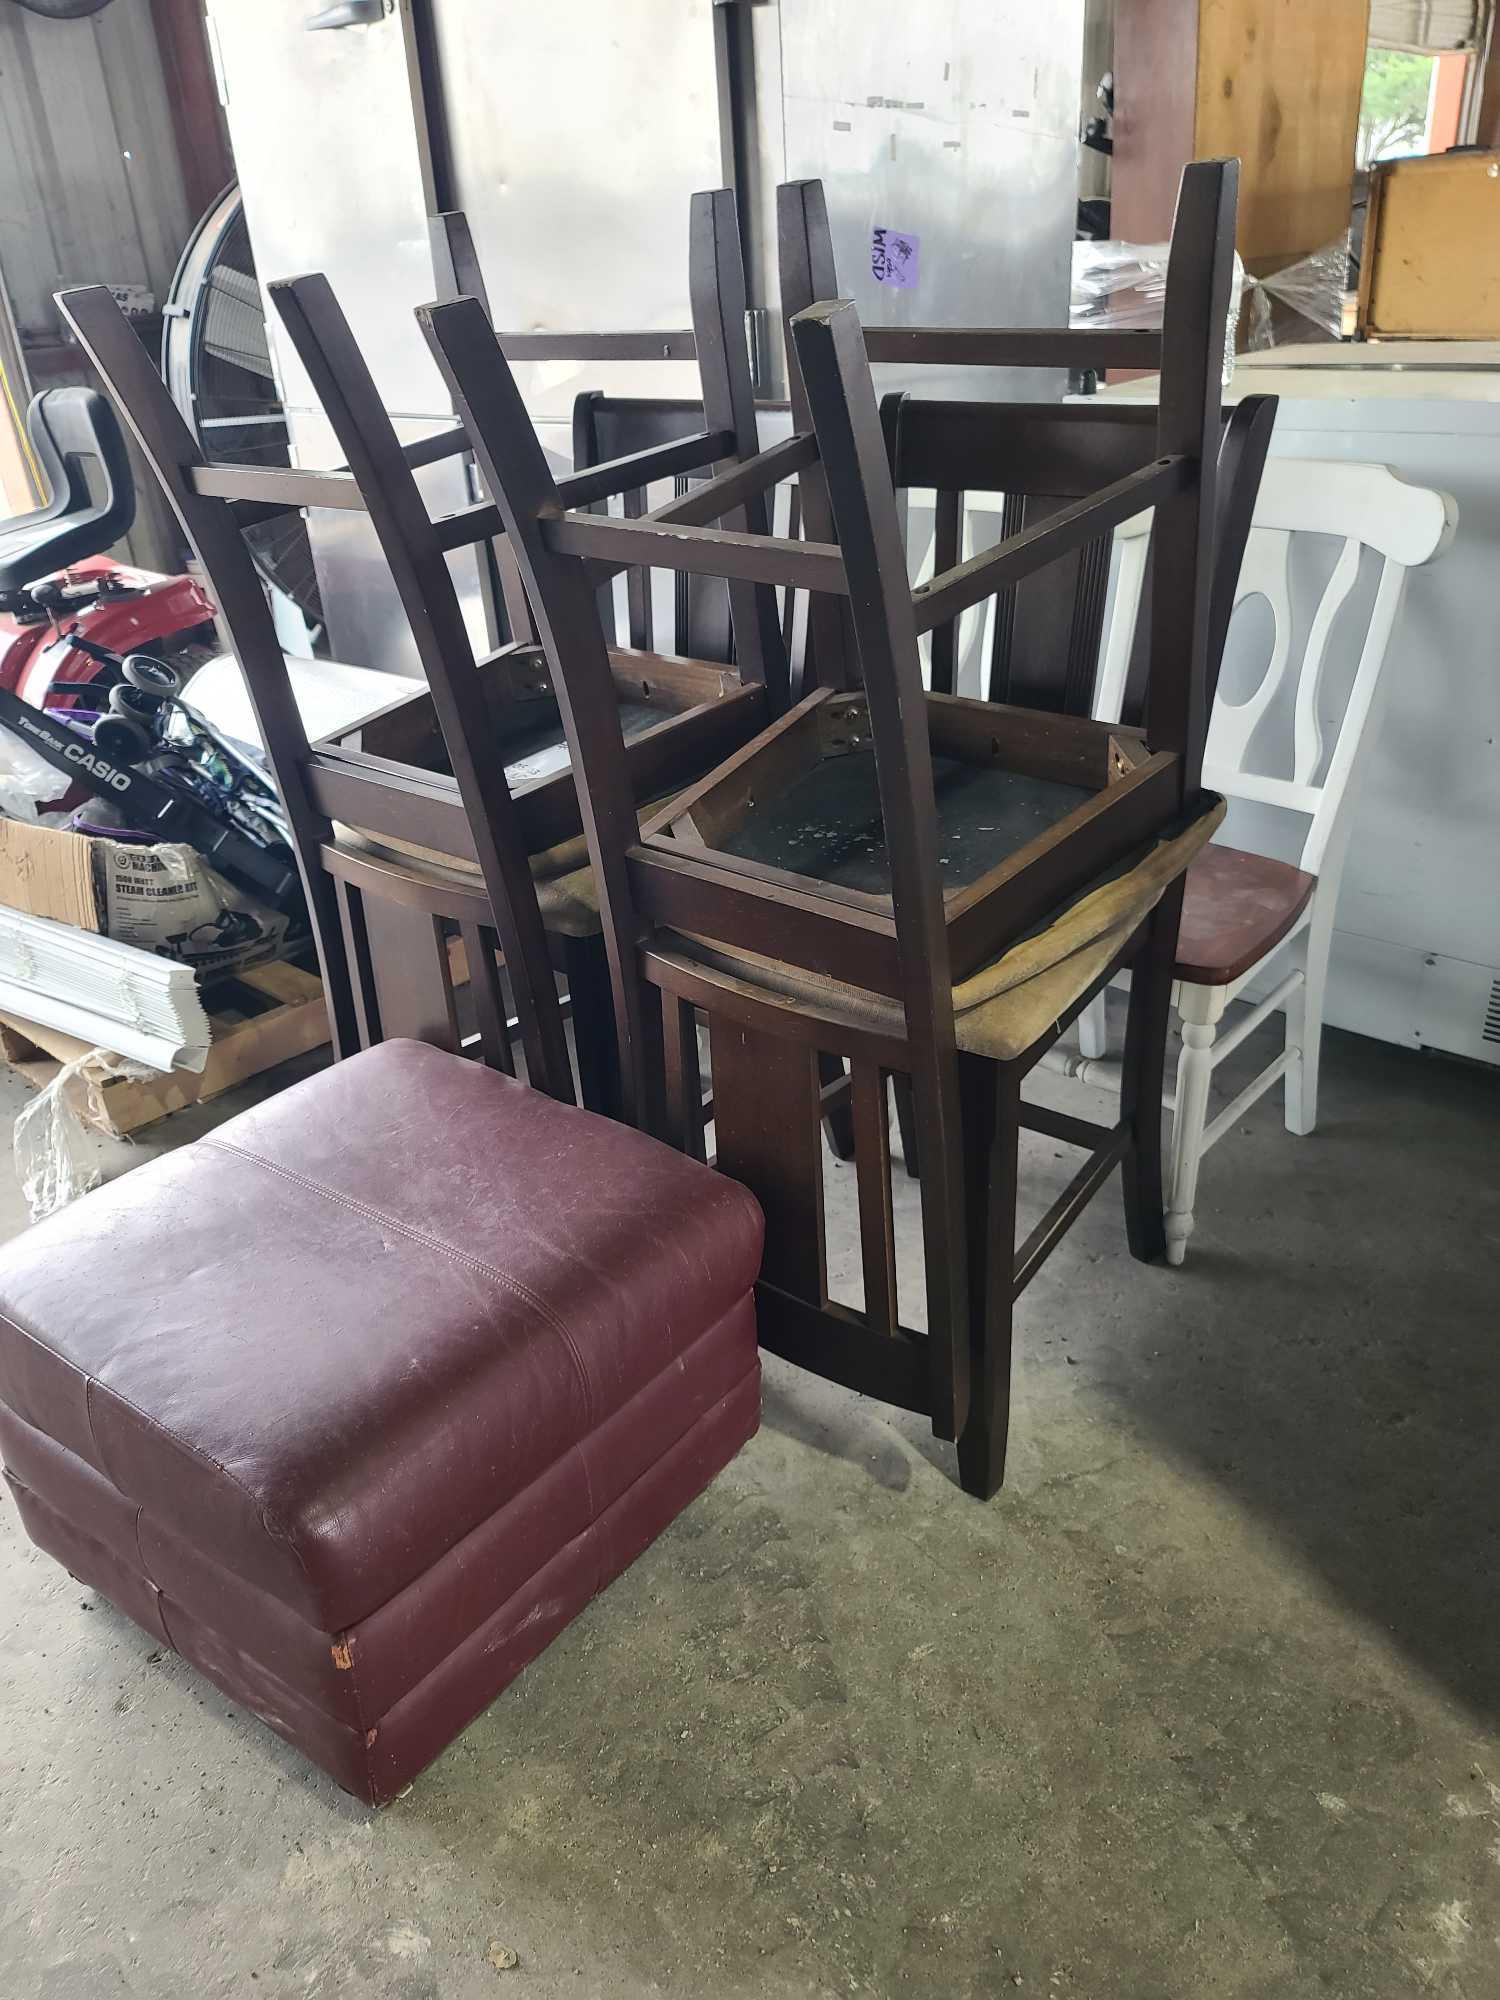 Group of Table Chairs, (1) Portable Leather Ottoman